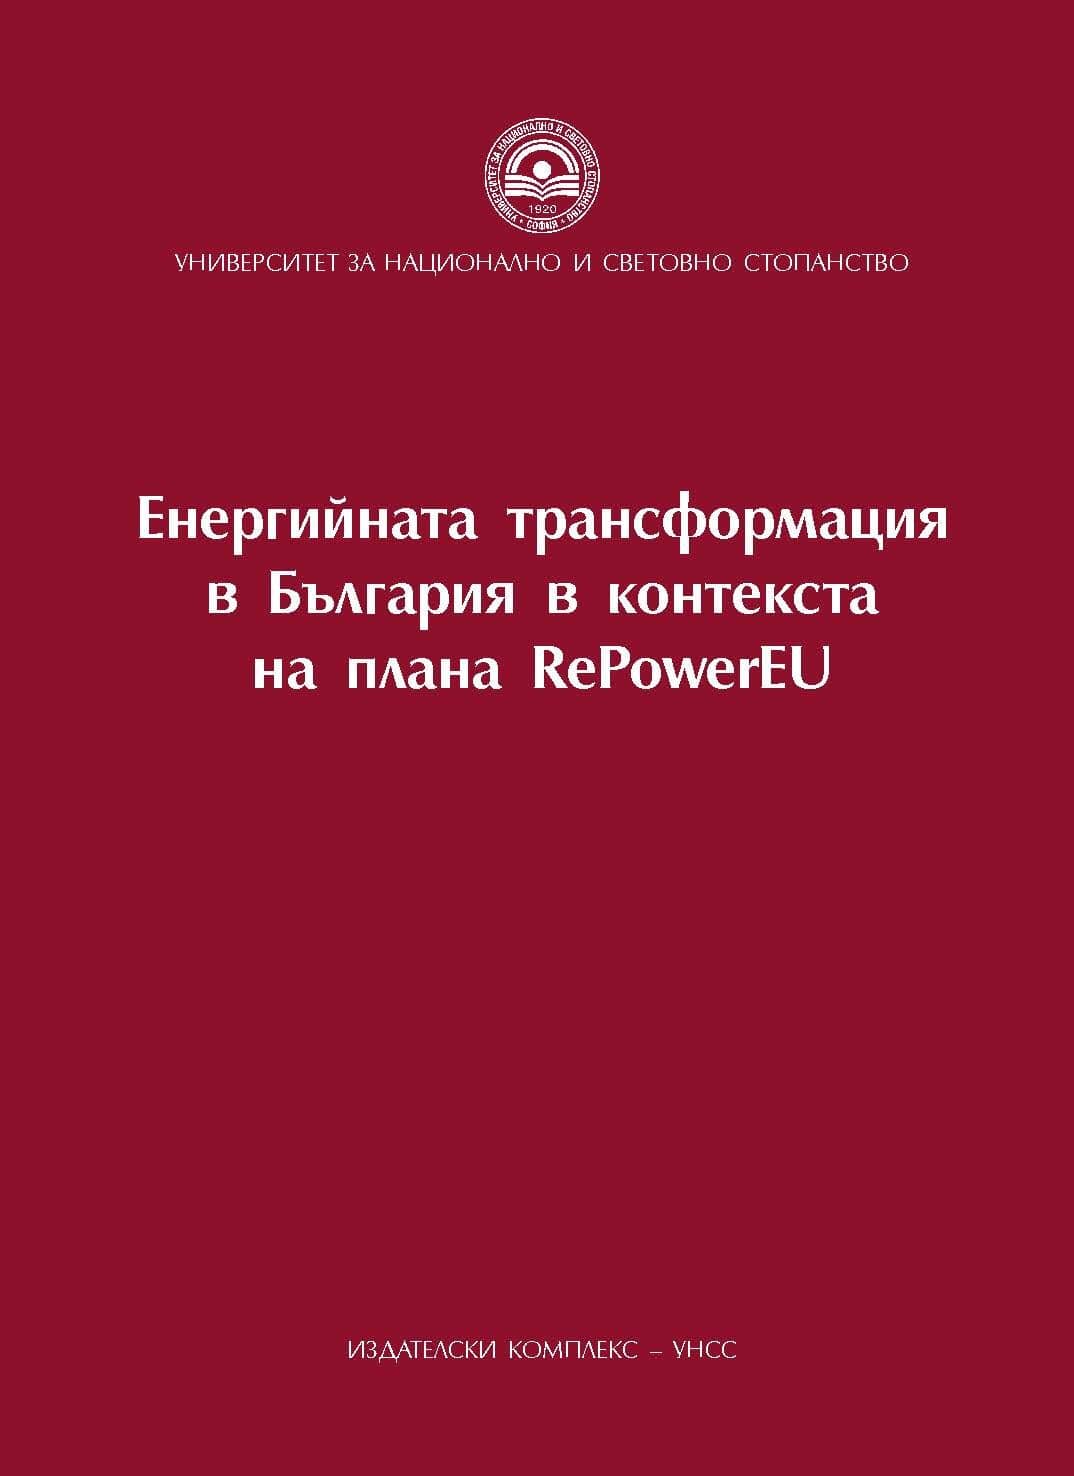 Process sustainability factors on energy transformation in the context of the REPowerEU plan